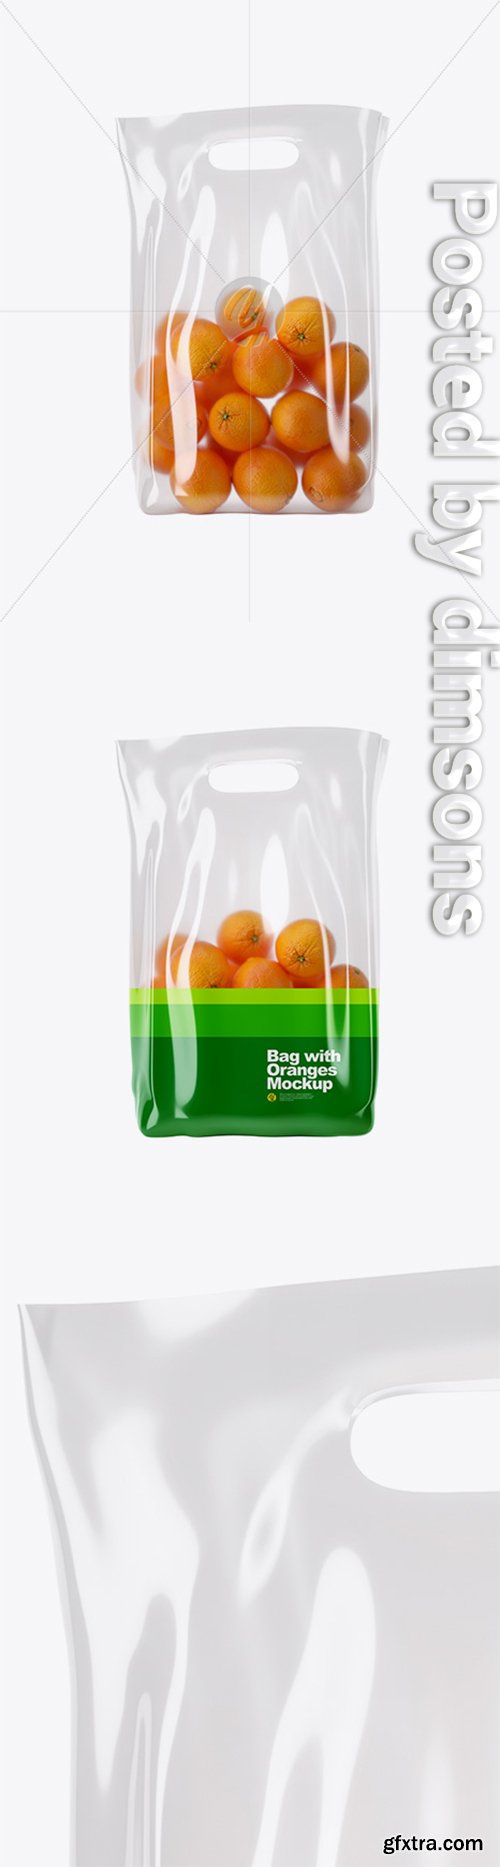 Glossy Bag with Oranges Mockup 30069